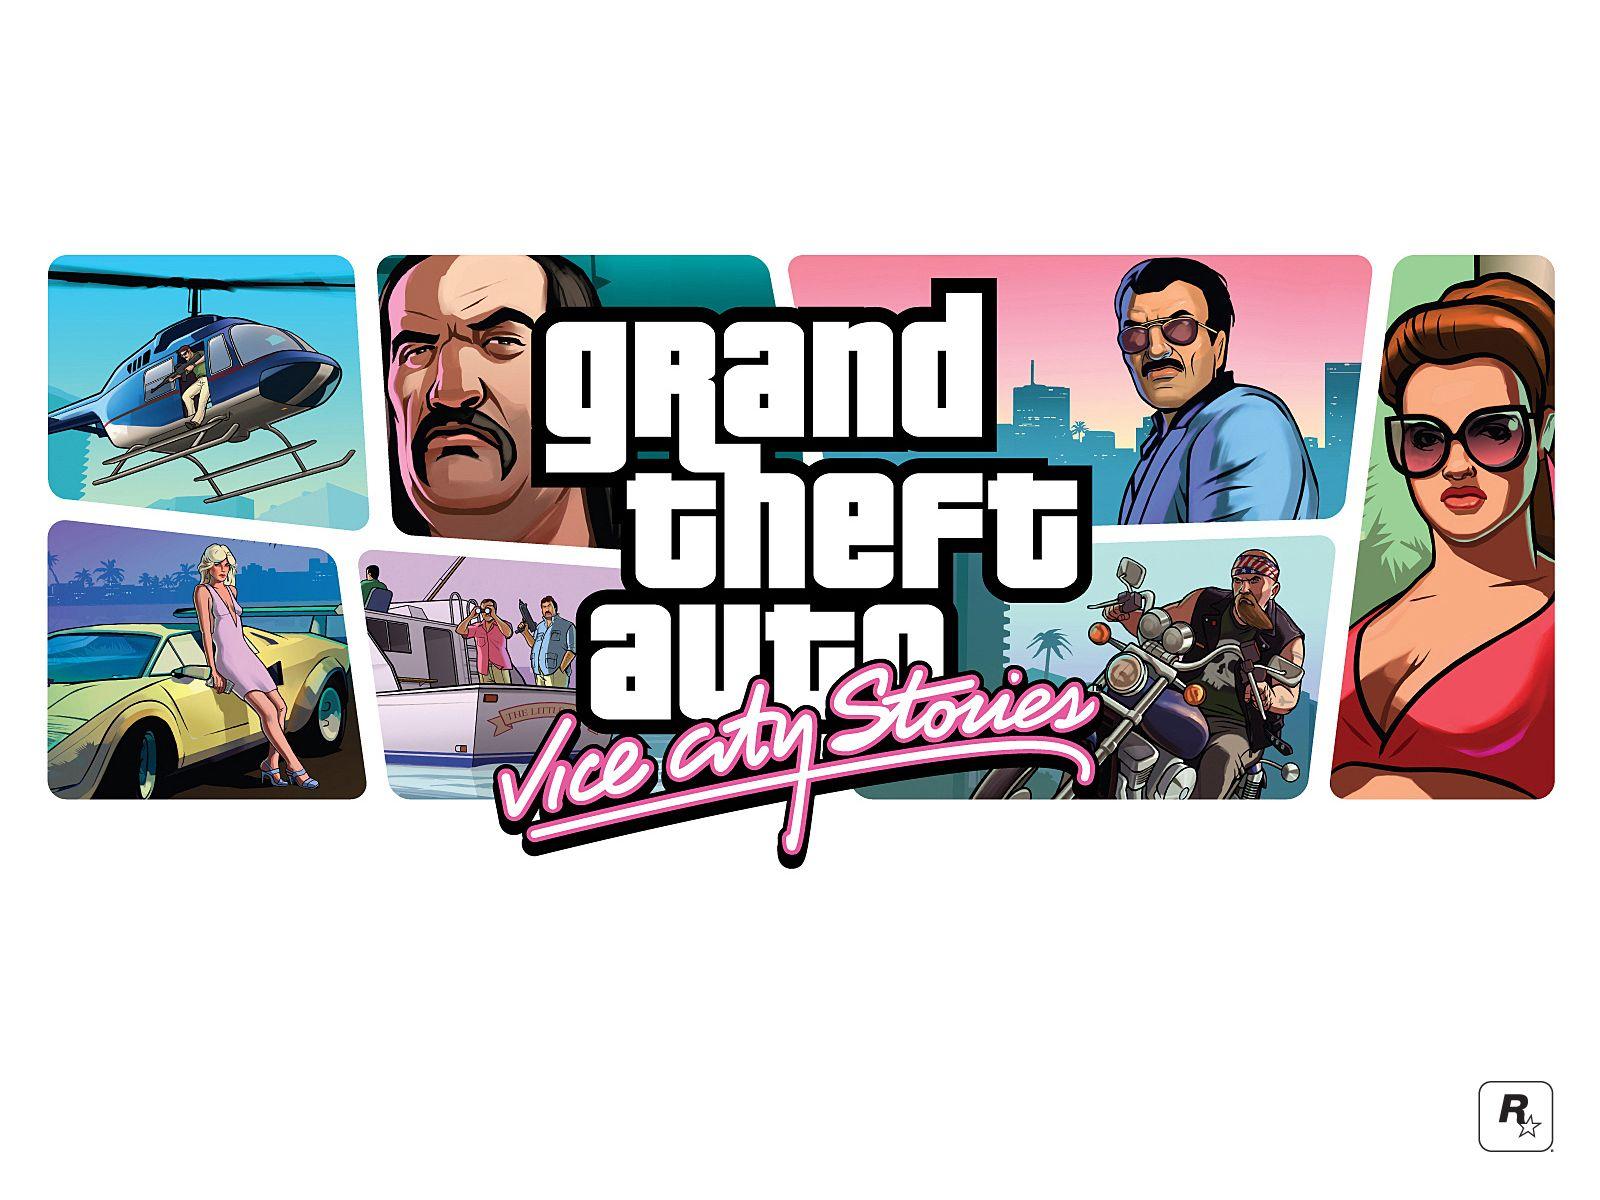 Video Game Grand Theft Auto: Liberty City Stories Wallpaper